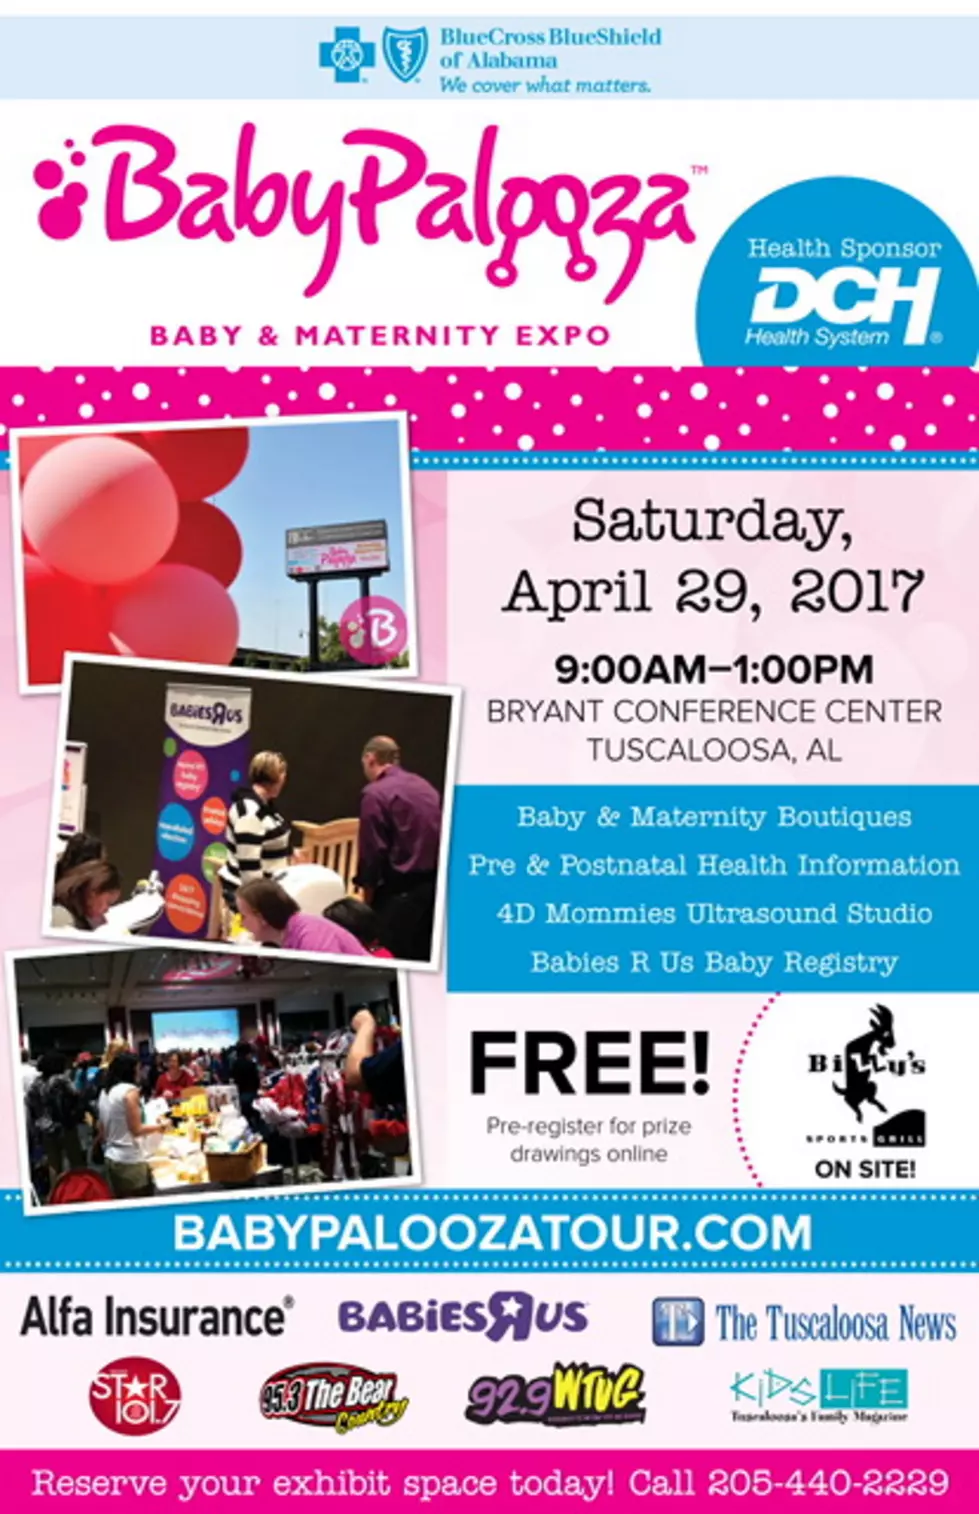 Babypalooza Baby and Maternity Expo Coming to Bryant Conference Center Saturday, April 29, 2017